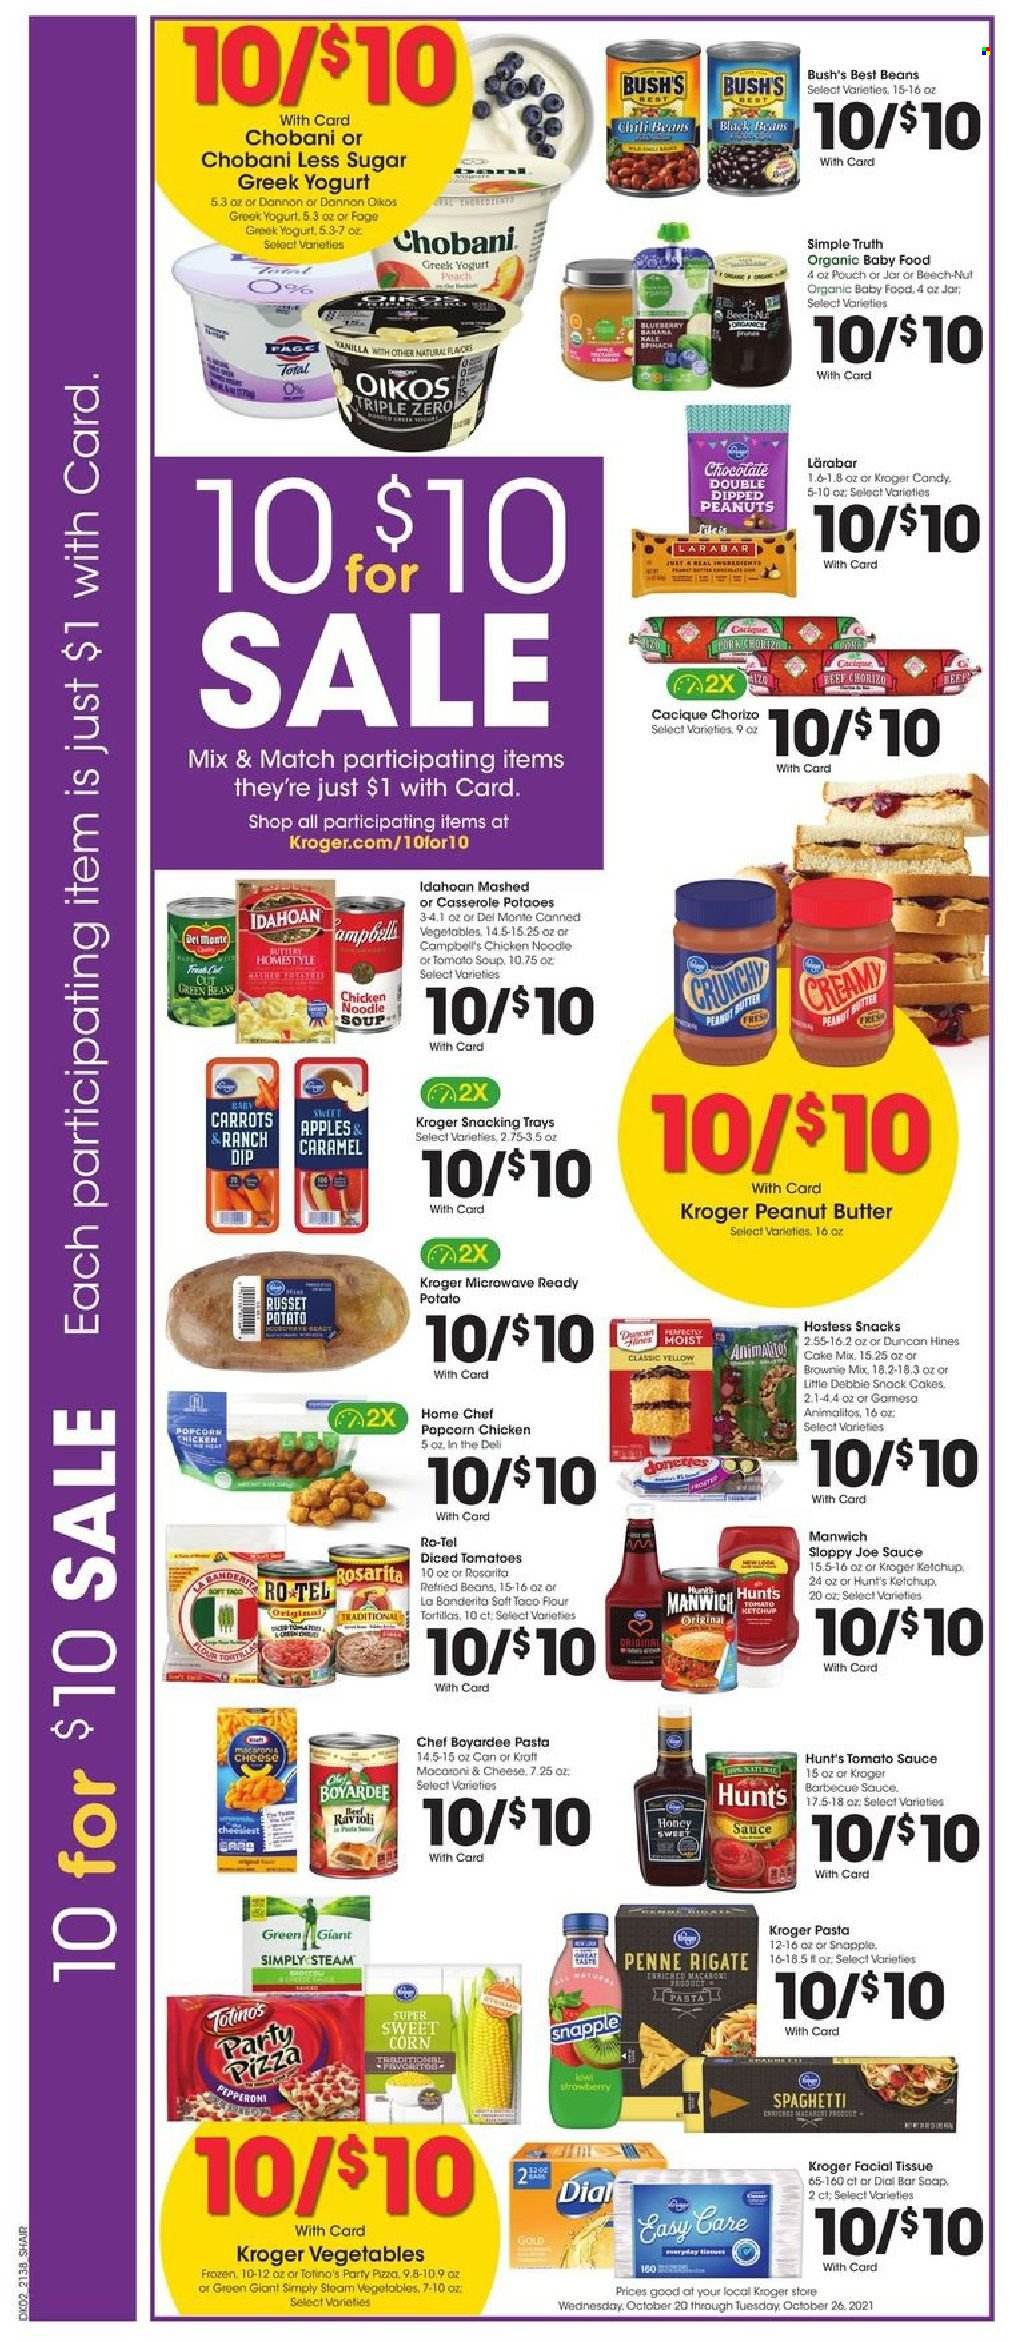 thumbnail - Kroger Flyer - 10/20/2021 - 10/26/2021 - Sales products - tortillas, brownie mix, cake mix, carrots, corn, russet potatoes, sweet corn, apples, Campbell's, ravioli, spaghetti, tomato soup, pizza, soup, pasta, noodles cup, noodles, Kraft®, chorizo, pepperoni, greek yoghurt, yoghurt, Oikos, Chobani, Dannon, dip, snack, popcorn, refried beans, tomato sauce, Manwich, Chef Boyardee, penne, BBQ sauce, caramel, ketchup, peanut butter, peanuts, Snapple, organic baby food, tissues, Dial, casserole, microwave. Page 4.